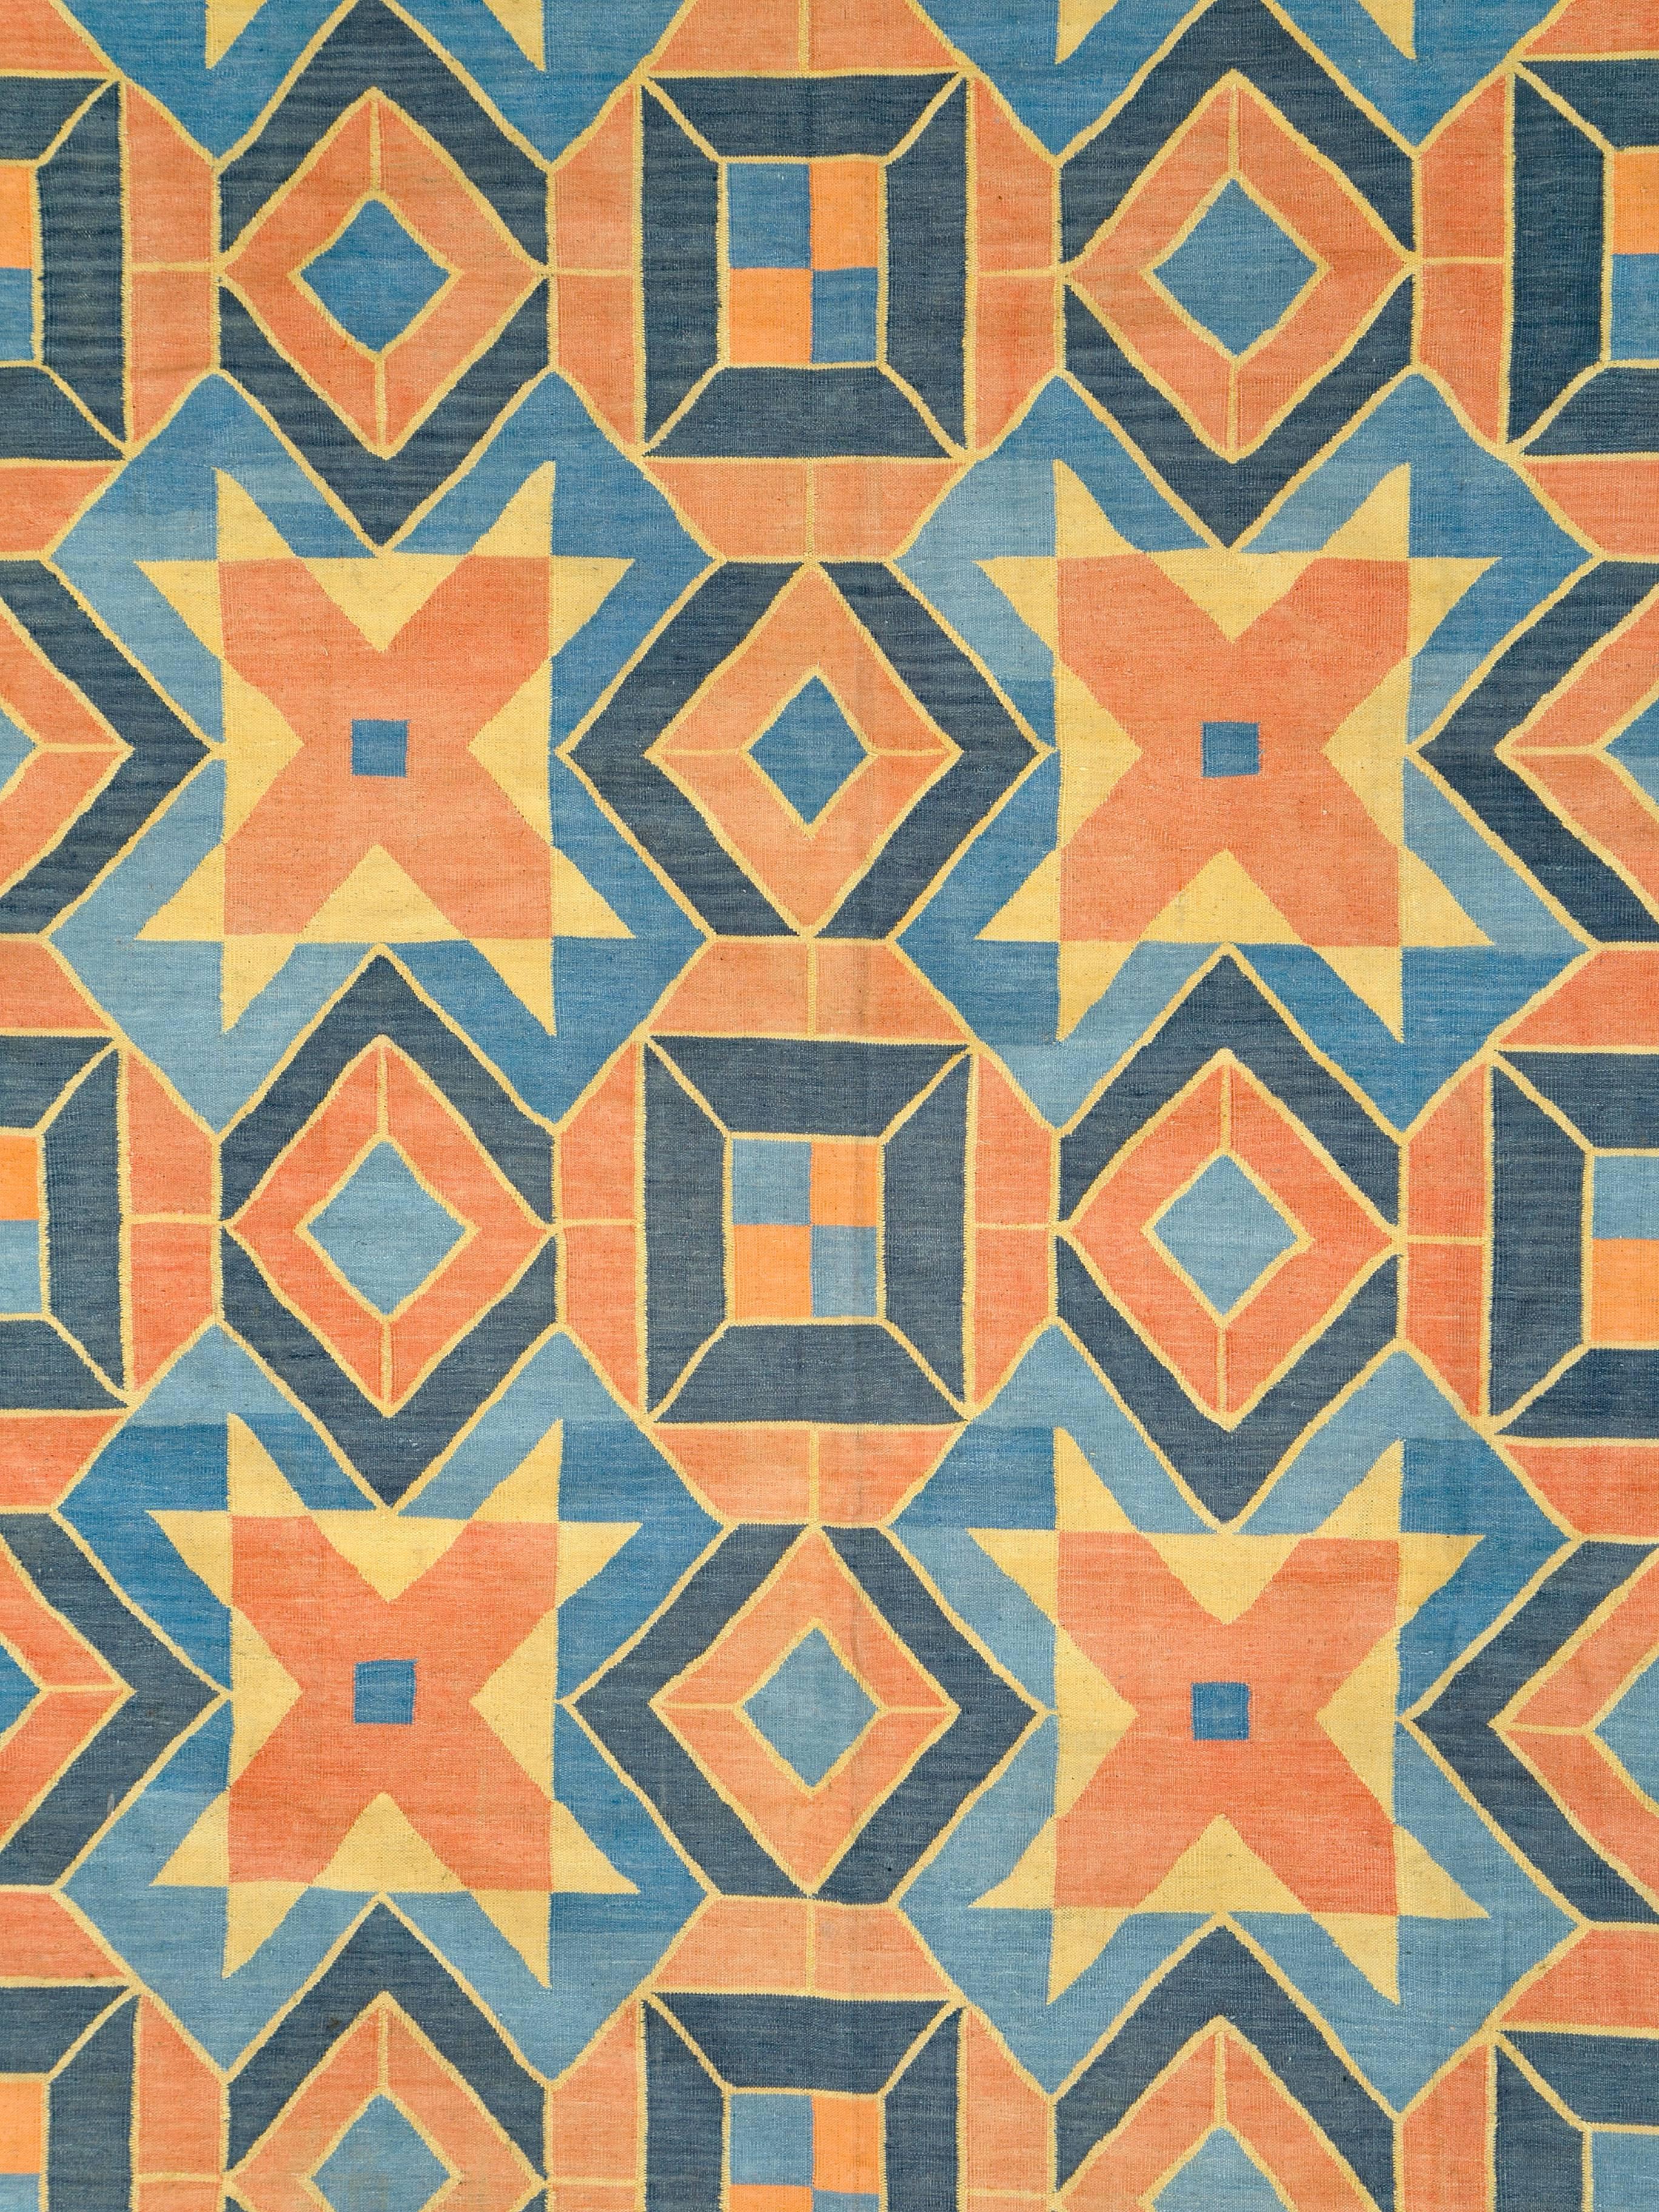 A vintage Indian flat-woven Dhurrie rug from the mid-20th century.